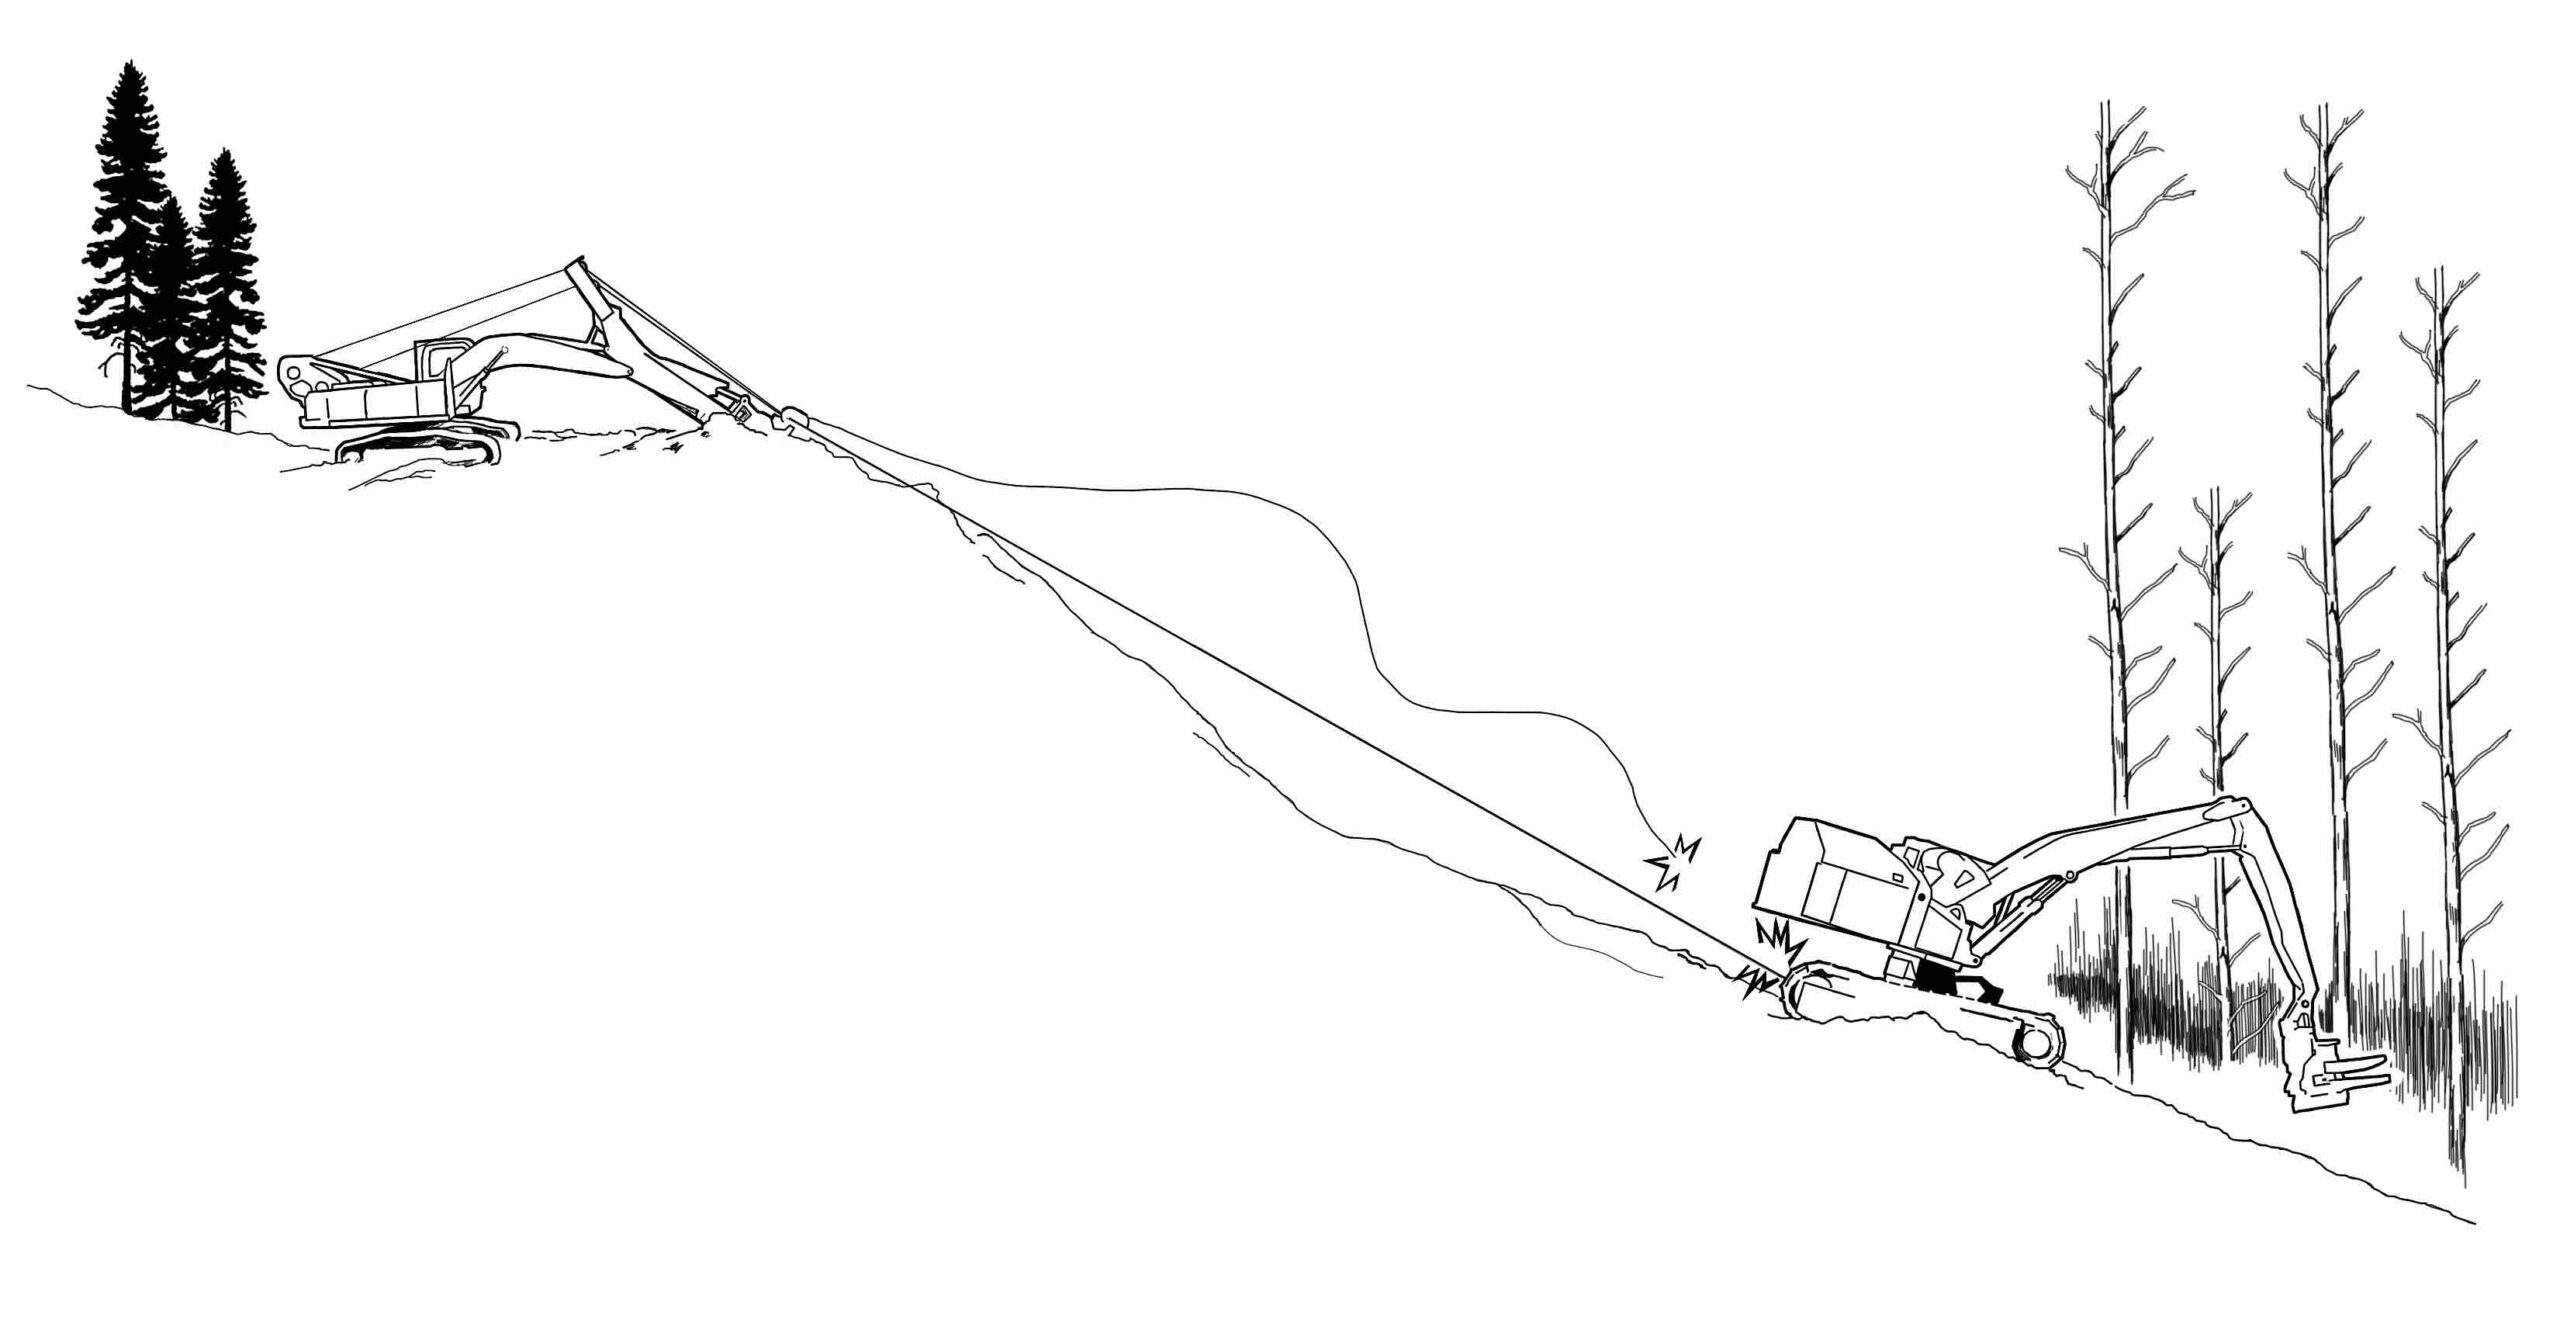 Tether-Line-Breaks-after-Damaged-by-Bucket-Move-Illustration